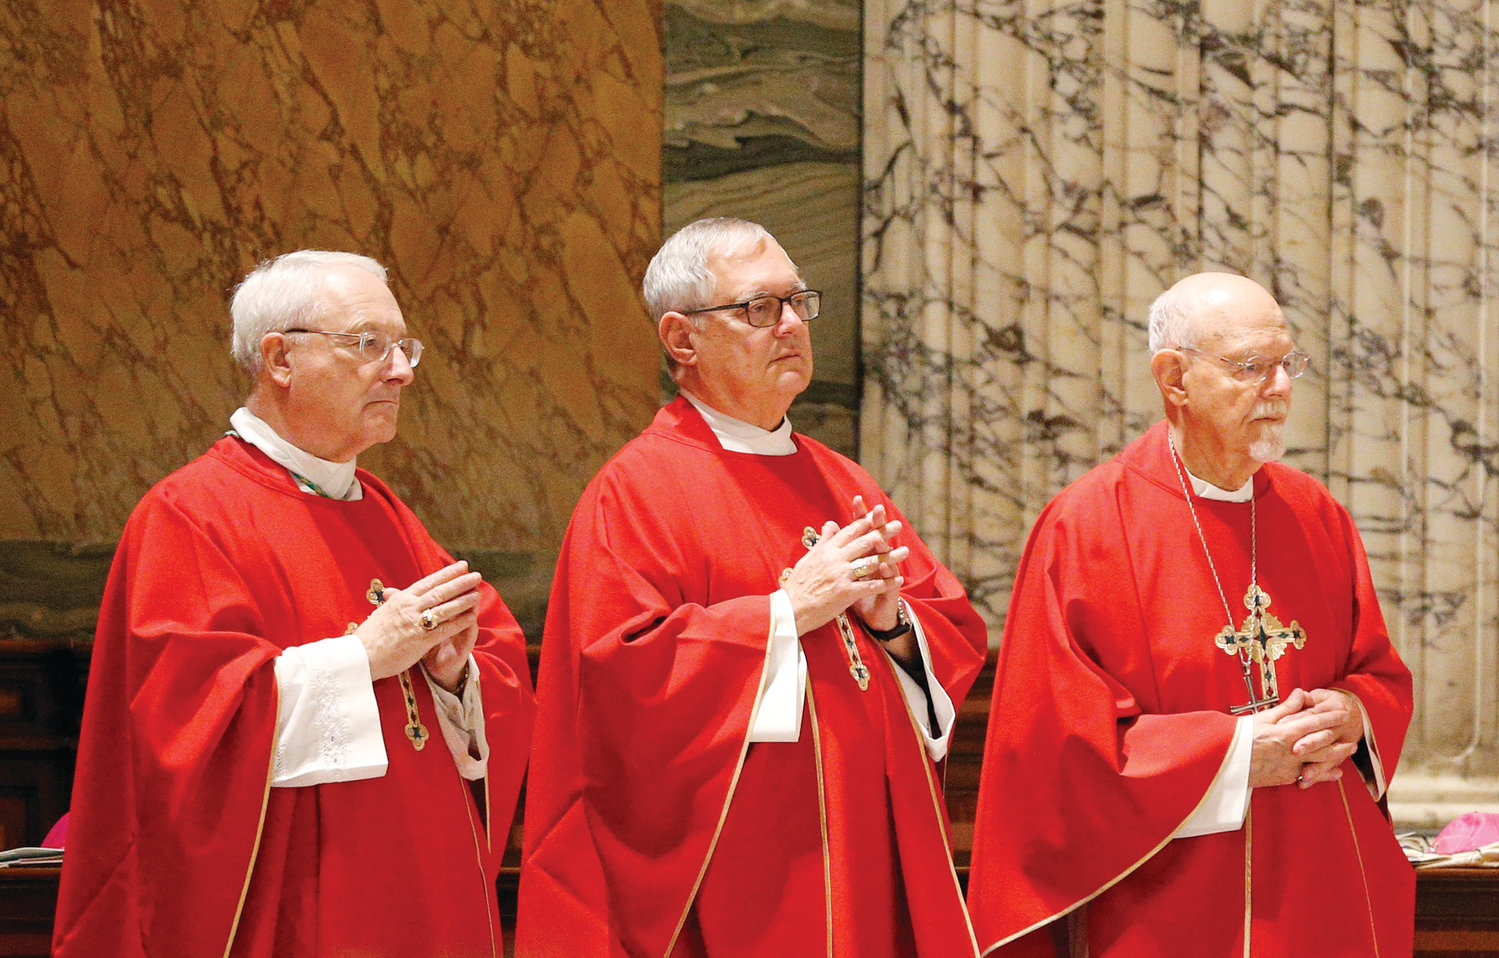 From left, Auxiliary Bishop Robert C. Evans, Bishop Thomas J. Tobin, and retired Auxiliary Bishop Peter A. Rosazza of Hartford, Conn., concelebrate Mass with other U.S. bishops from the New England States at the Basilica of St. Paul Outside the Walls in Rome Nov. 5. The bishops were making their “ad limina” visits to the Vatican to report on the status of their dioceses to Pope Francis and Vatican officials.